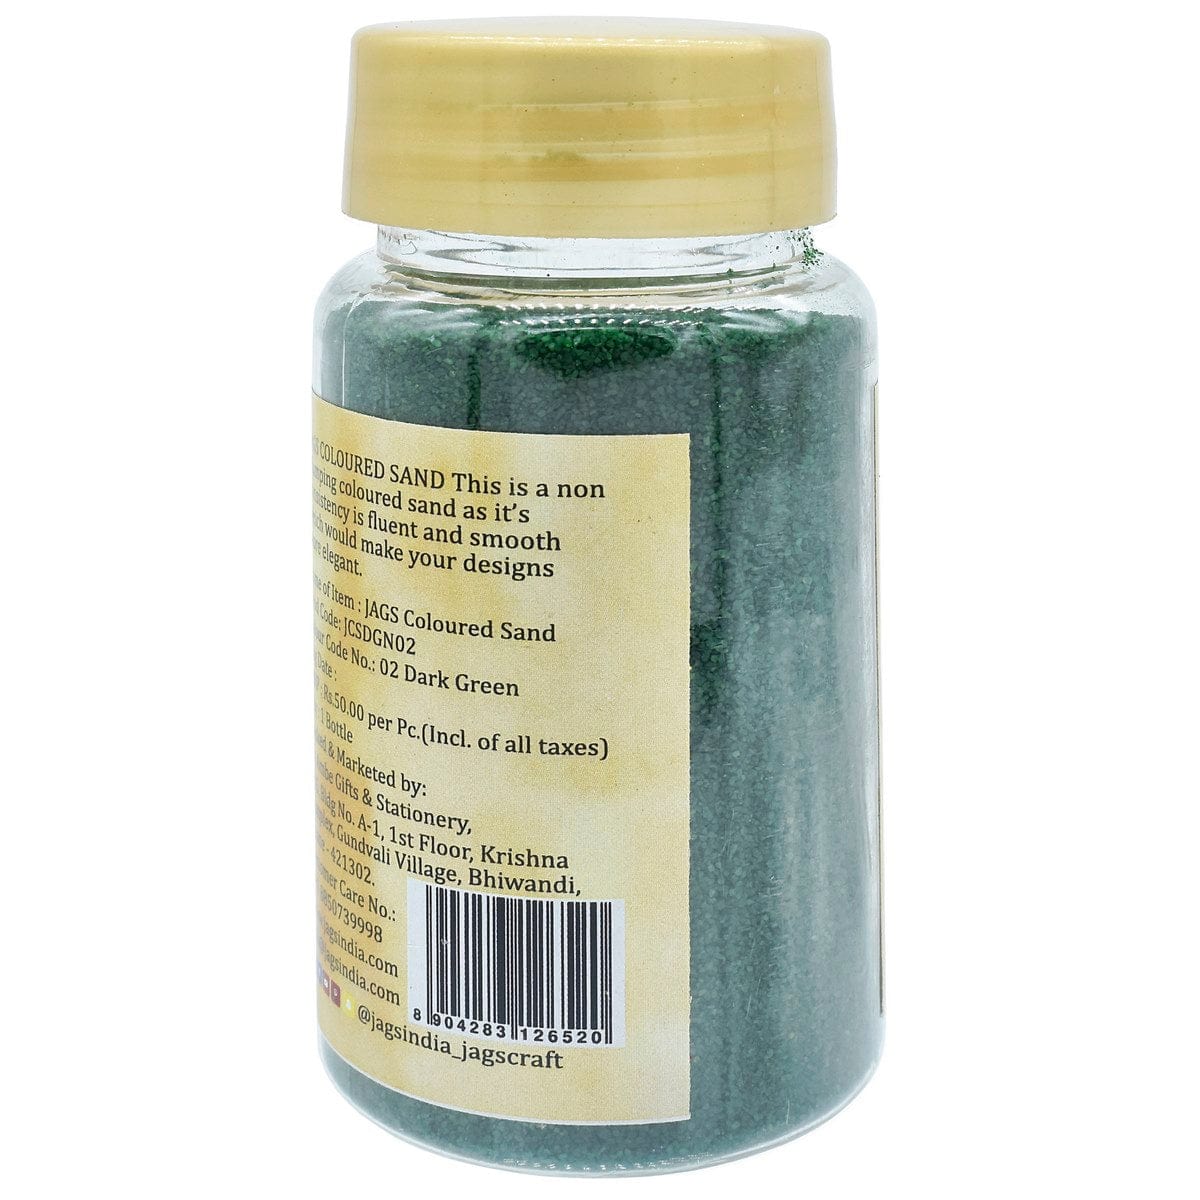 jags-mumbai Sand Jags Coloured Sand 160Gms Dark Green No. 2 - Vibrant and Versatile Sand for Crafts and Decor